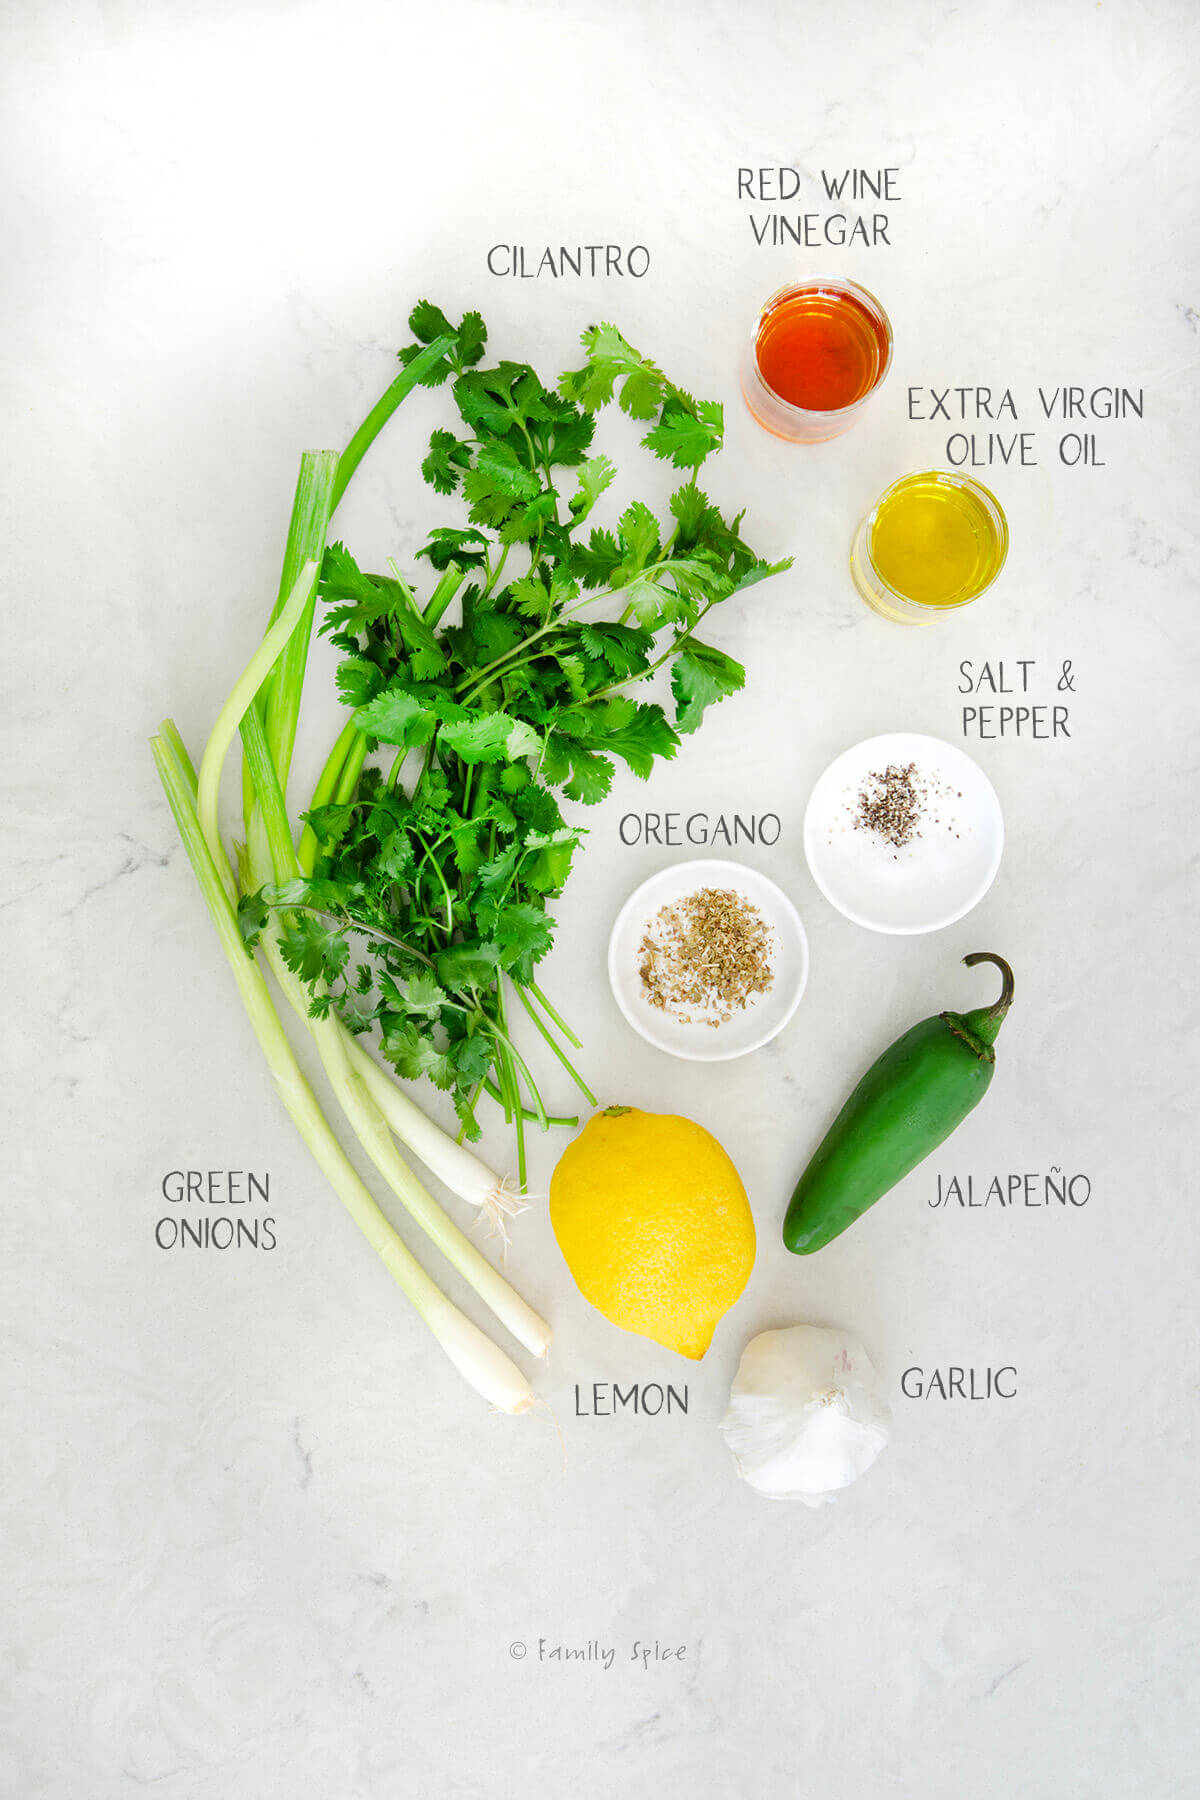 Ingredients labeled and needed to make cilantro chimichurri